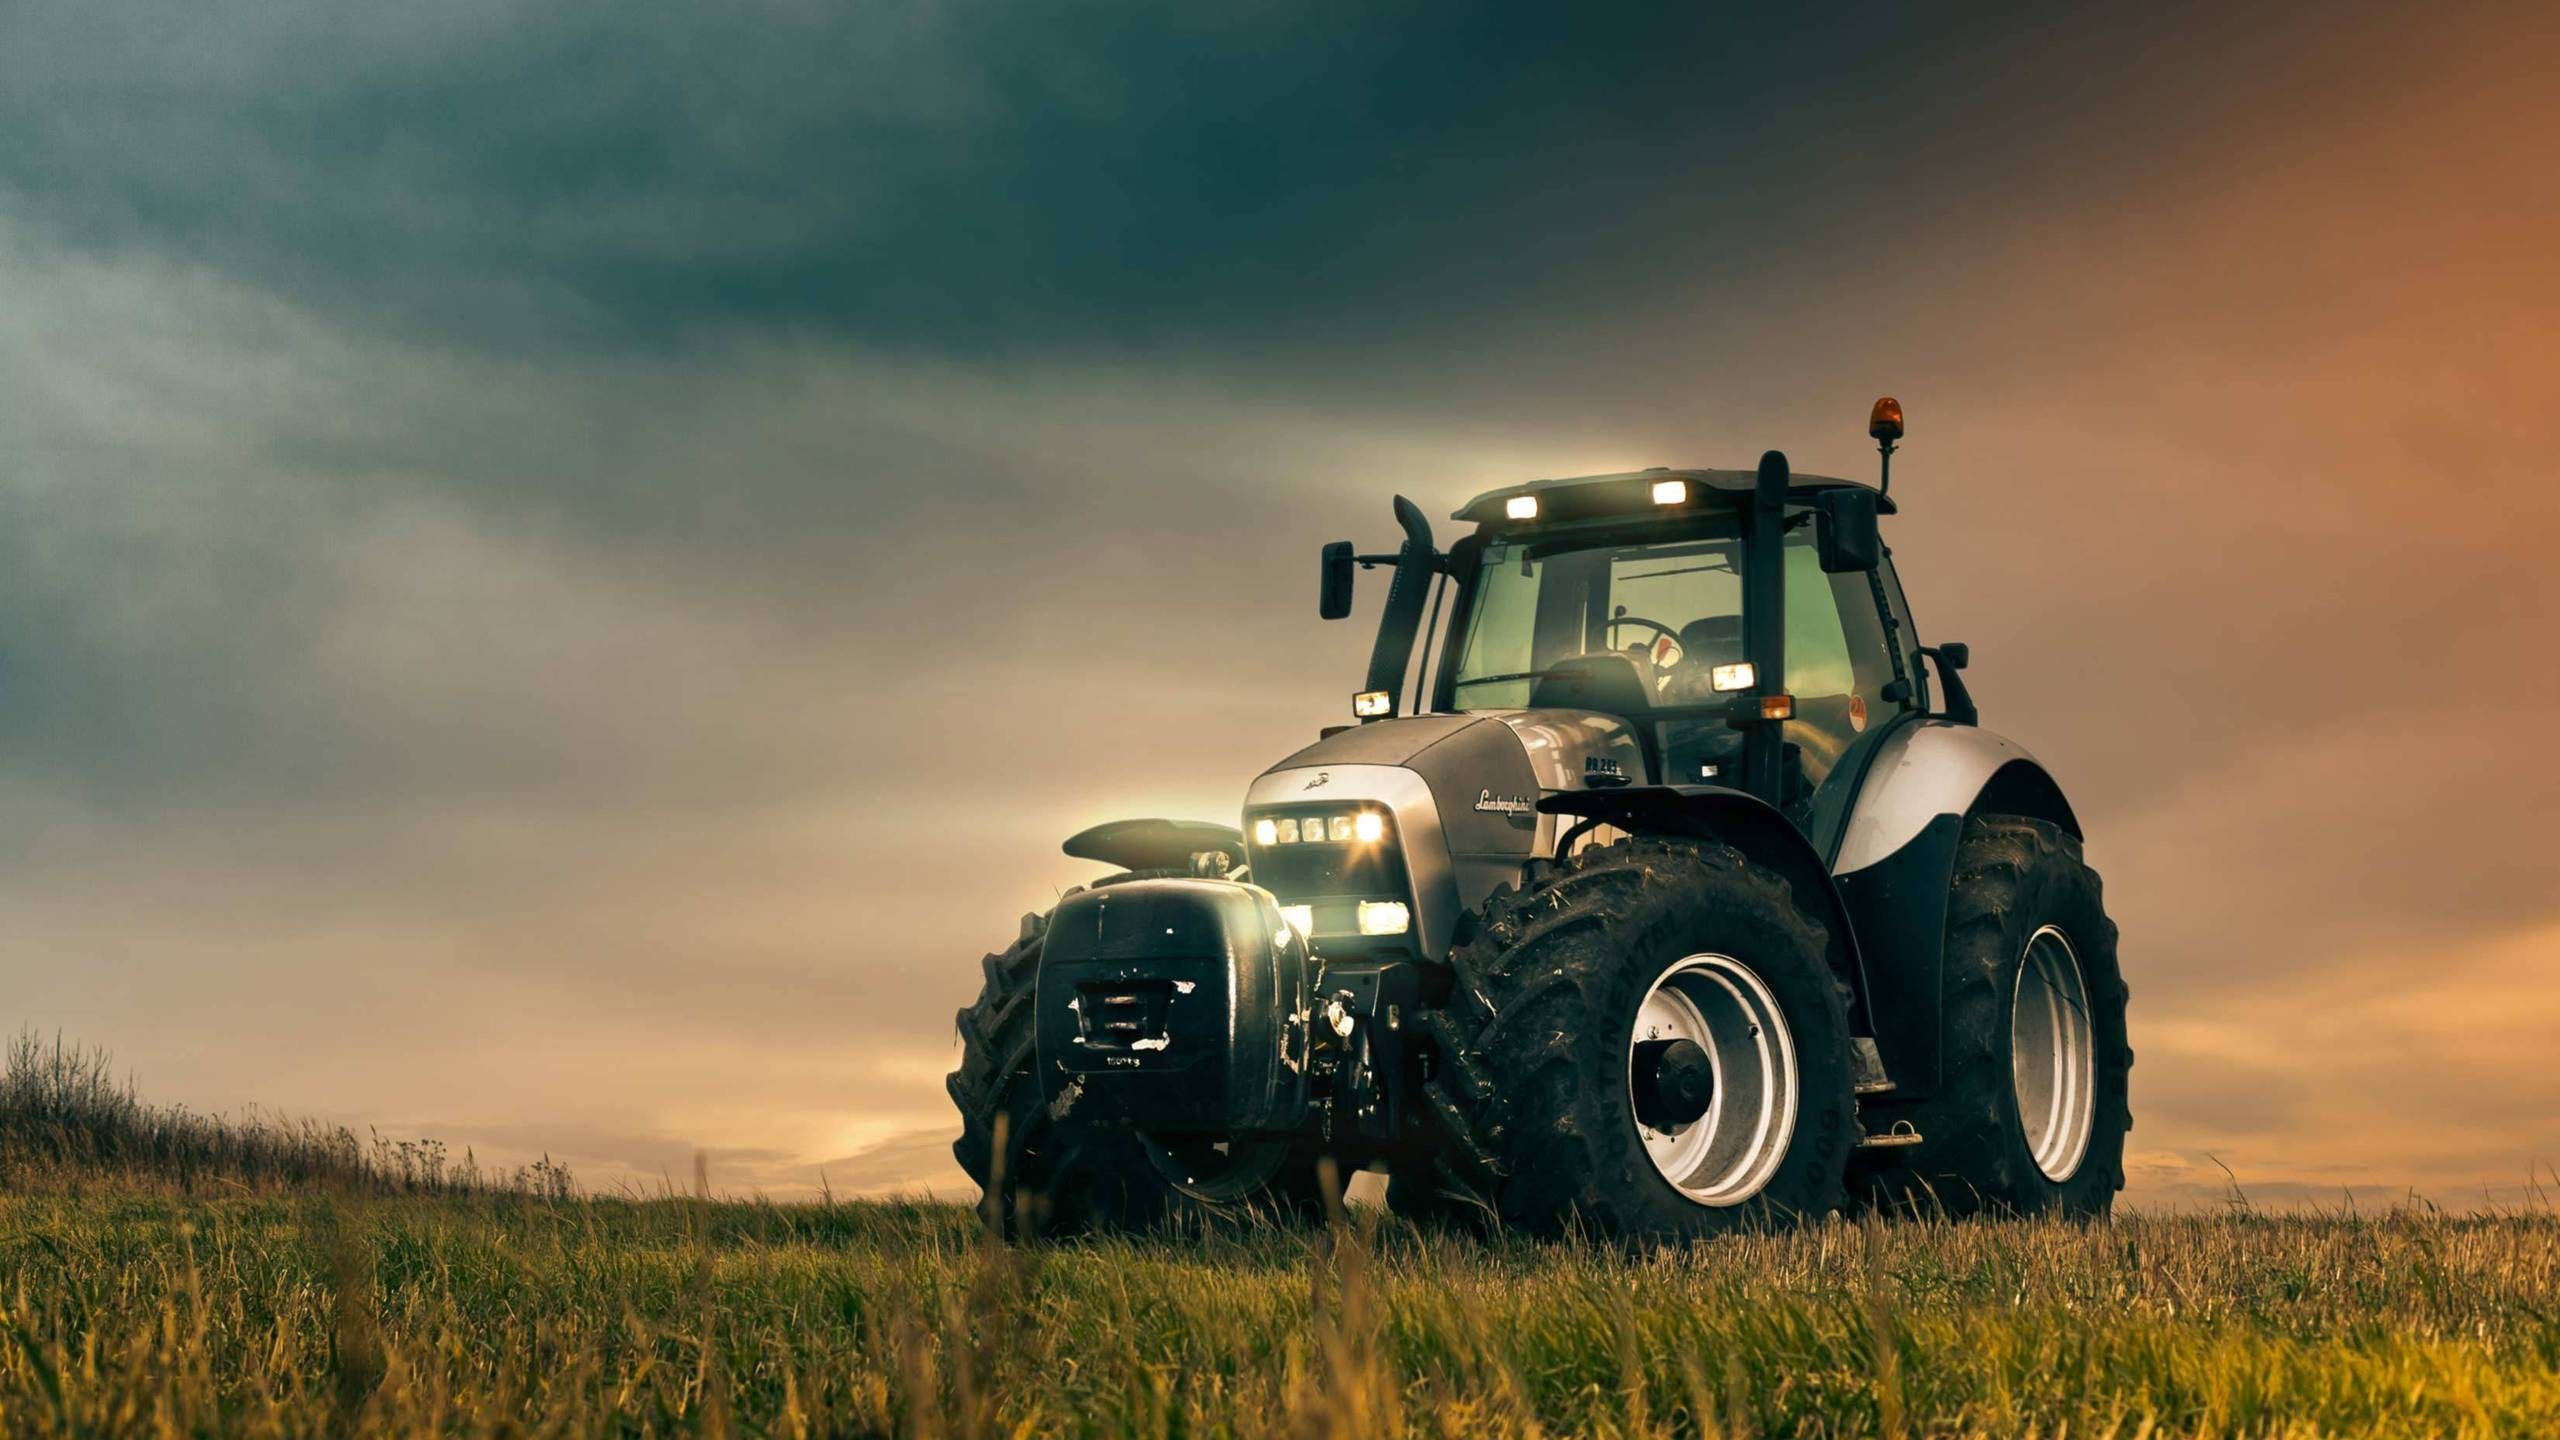 38 Tractor HD Wallpapers Backgrounds - Wallpaper Abyss